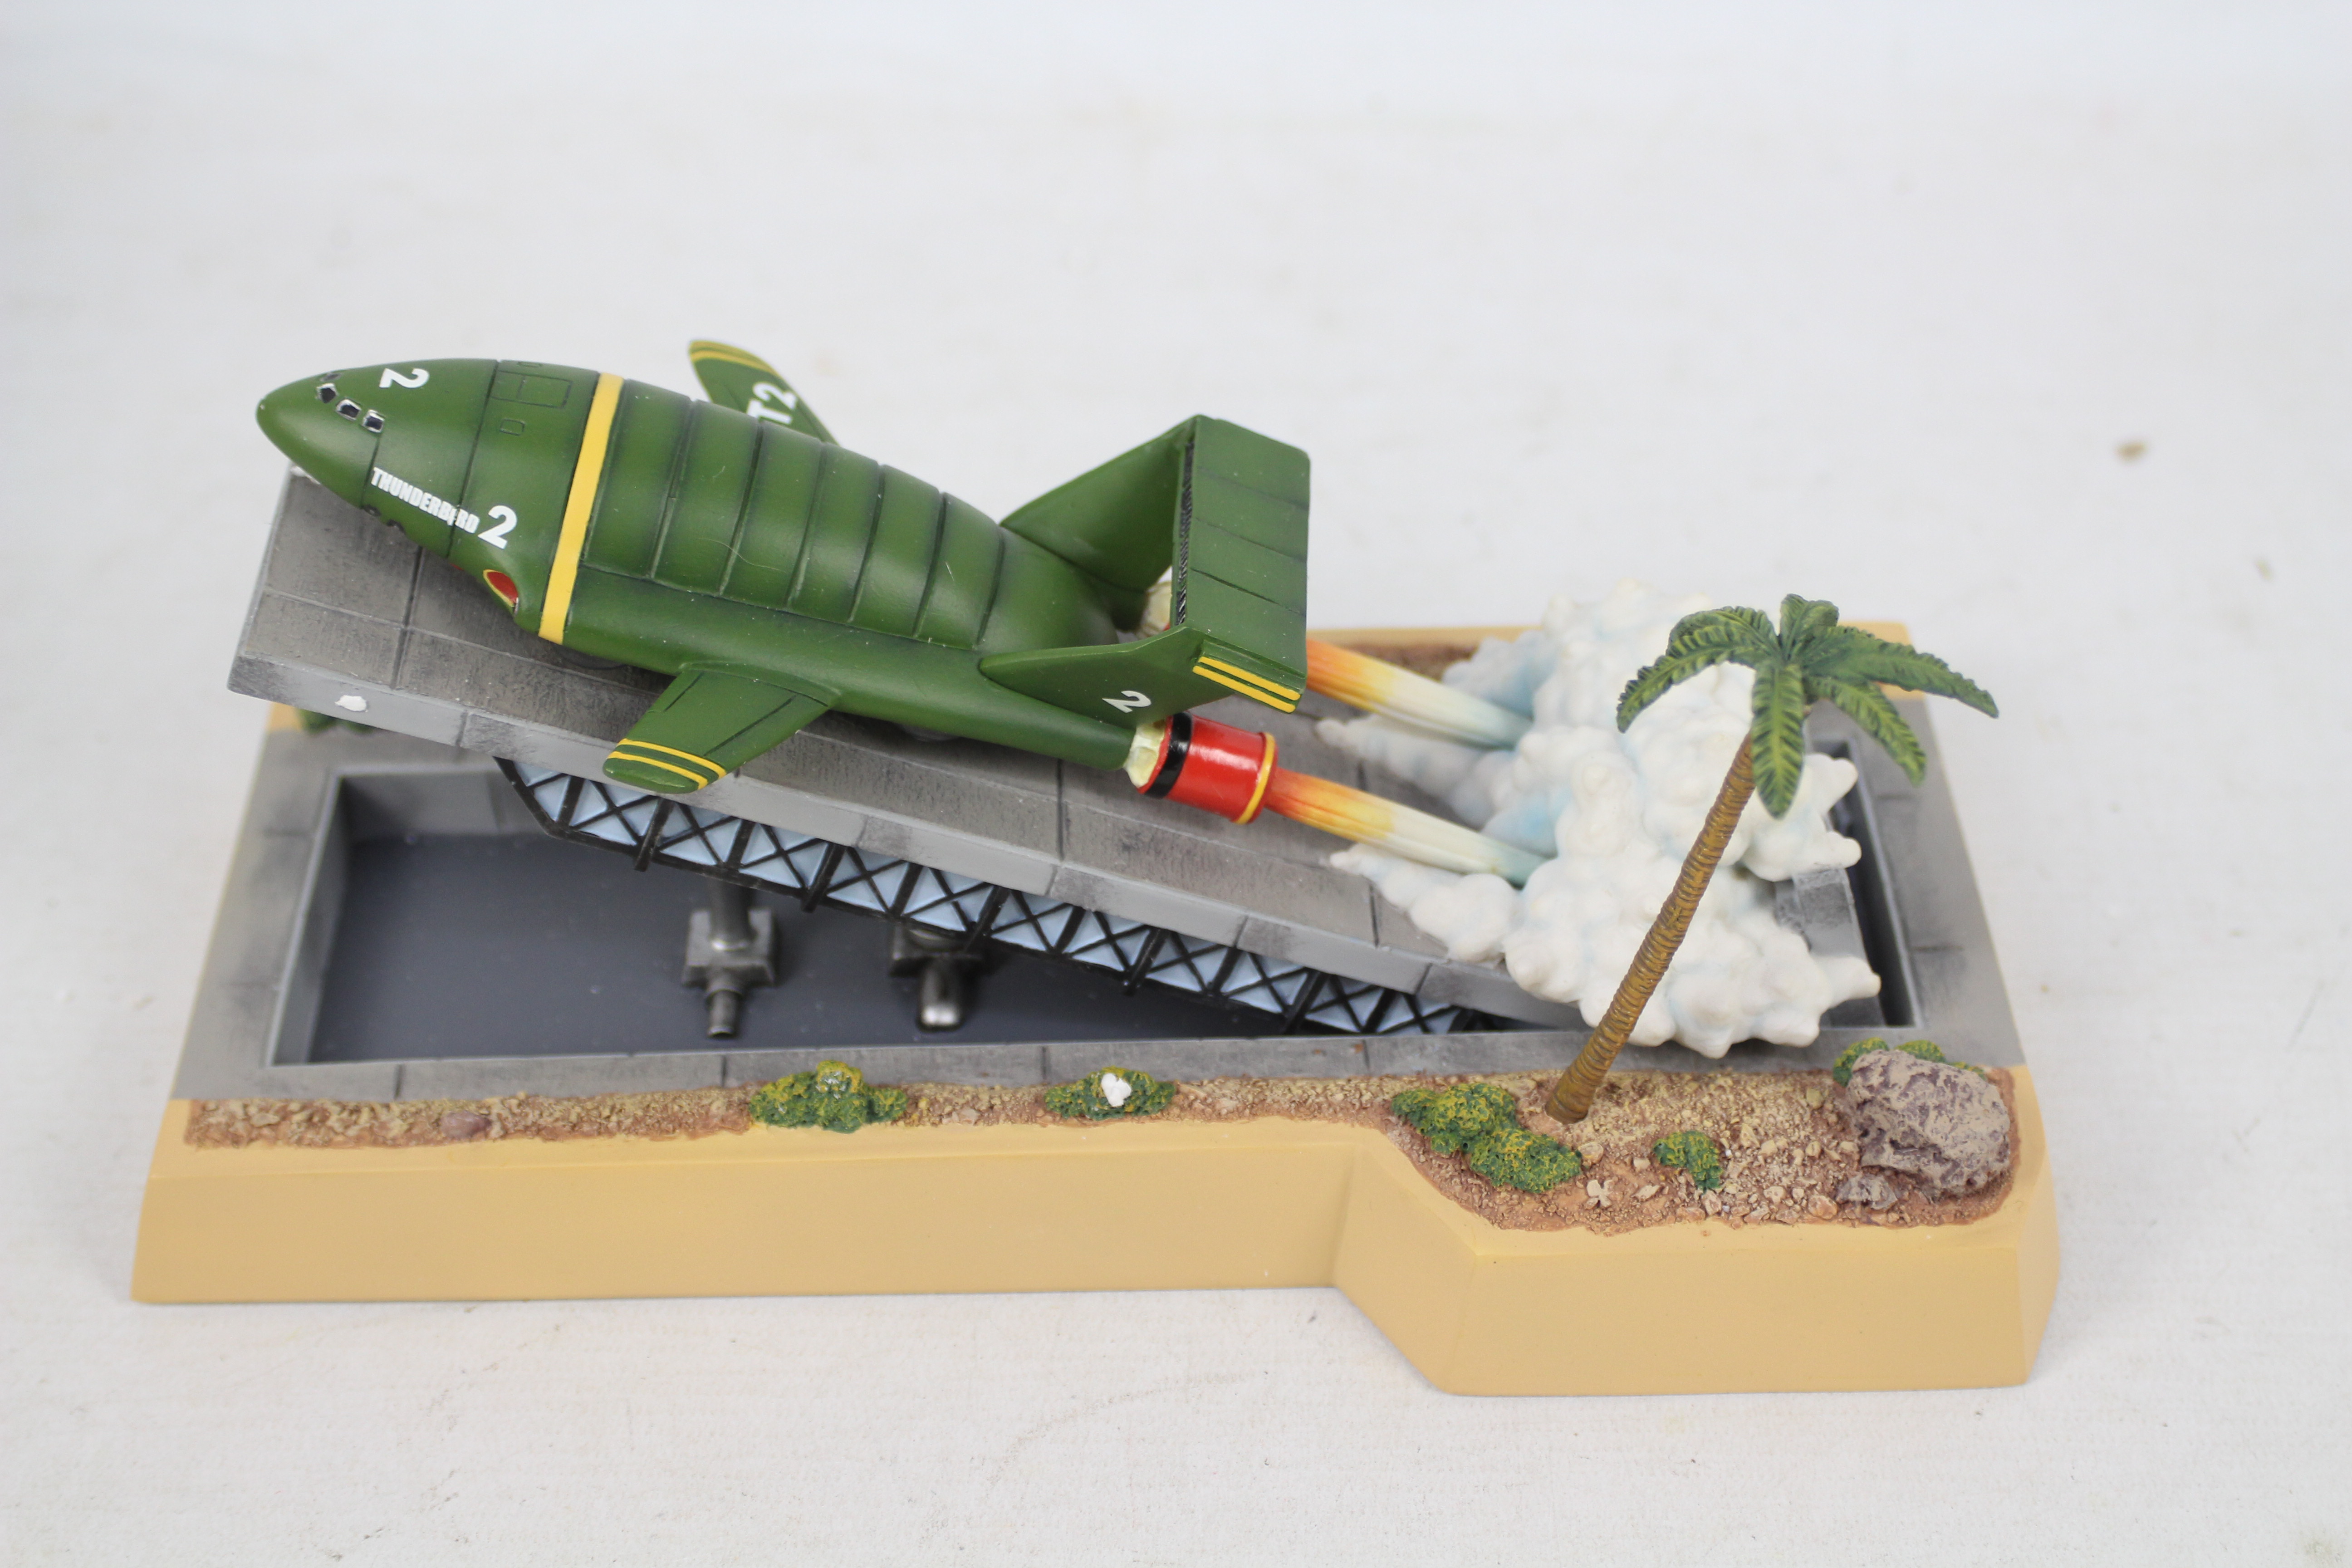 Thunderbirds - A limited edition Robert Harrop model of Thunderbird 2 from the Gerry Anderson show, - Image 3 of 4